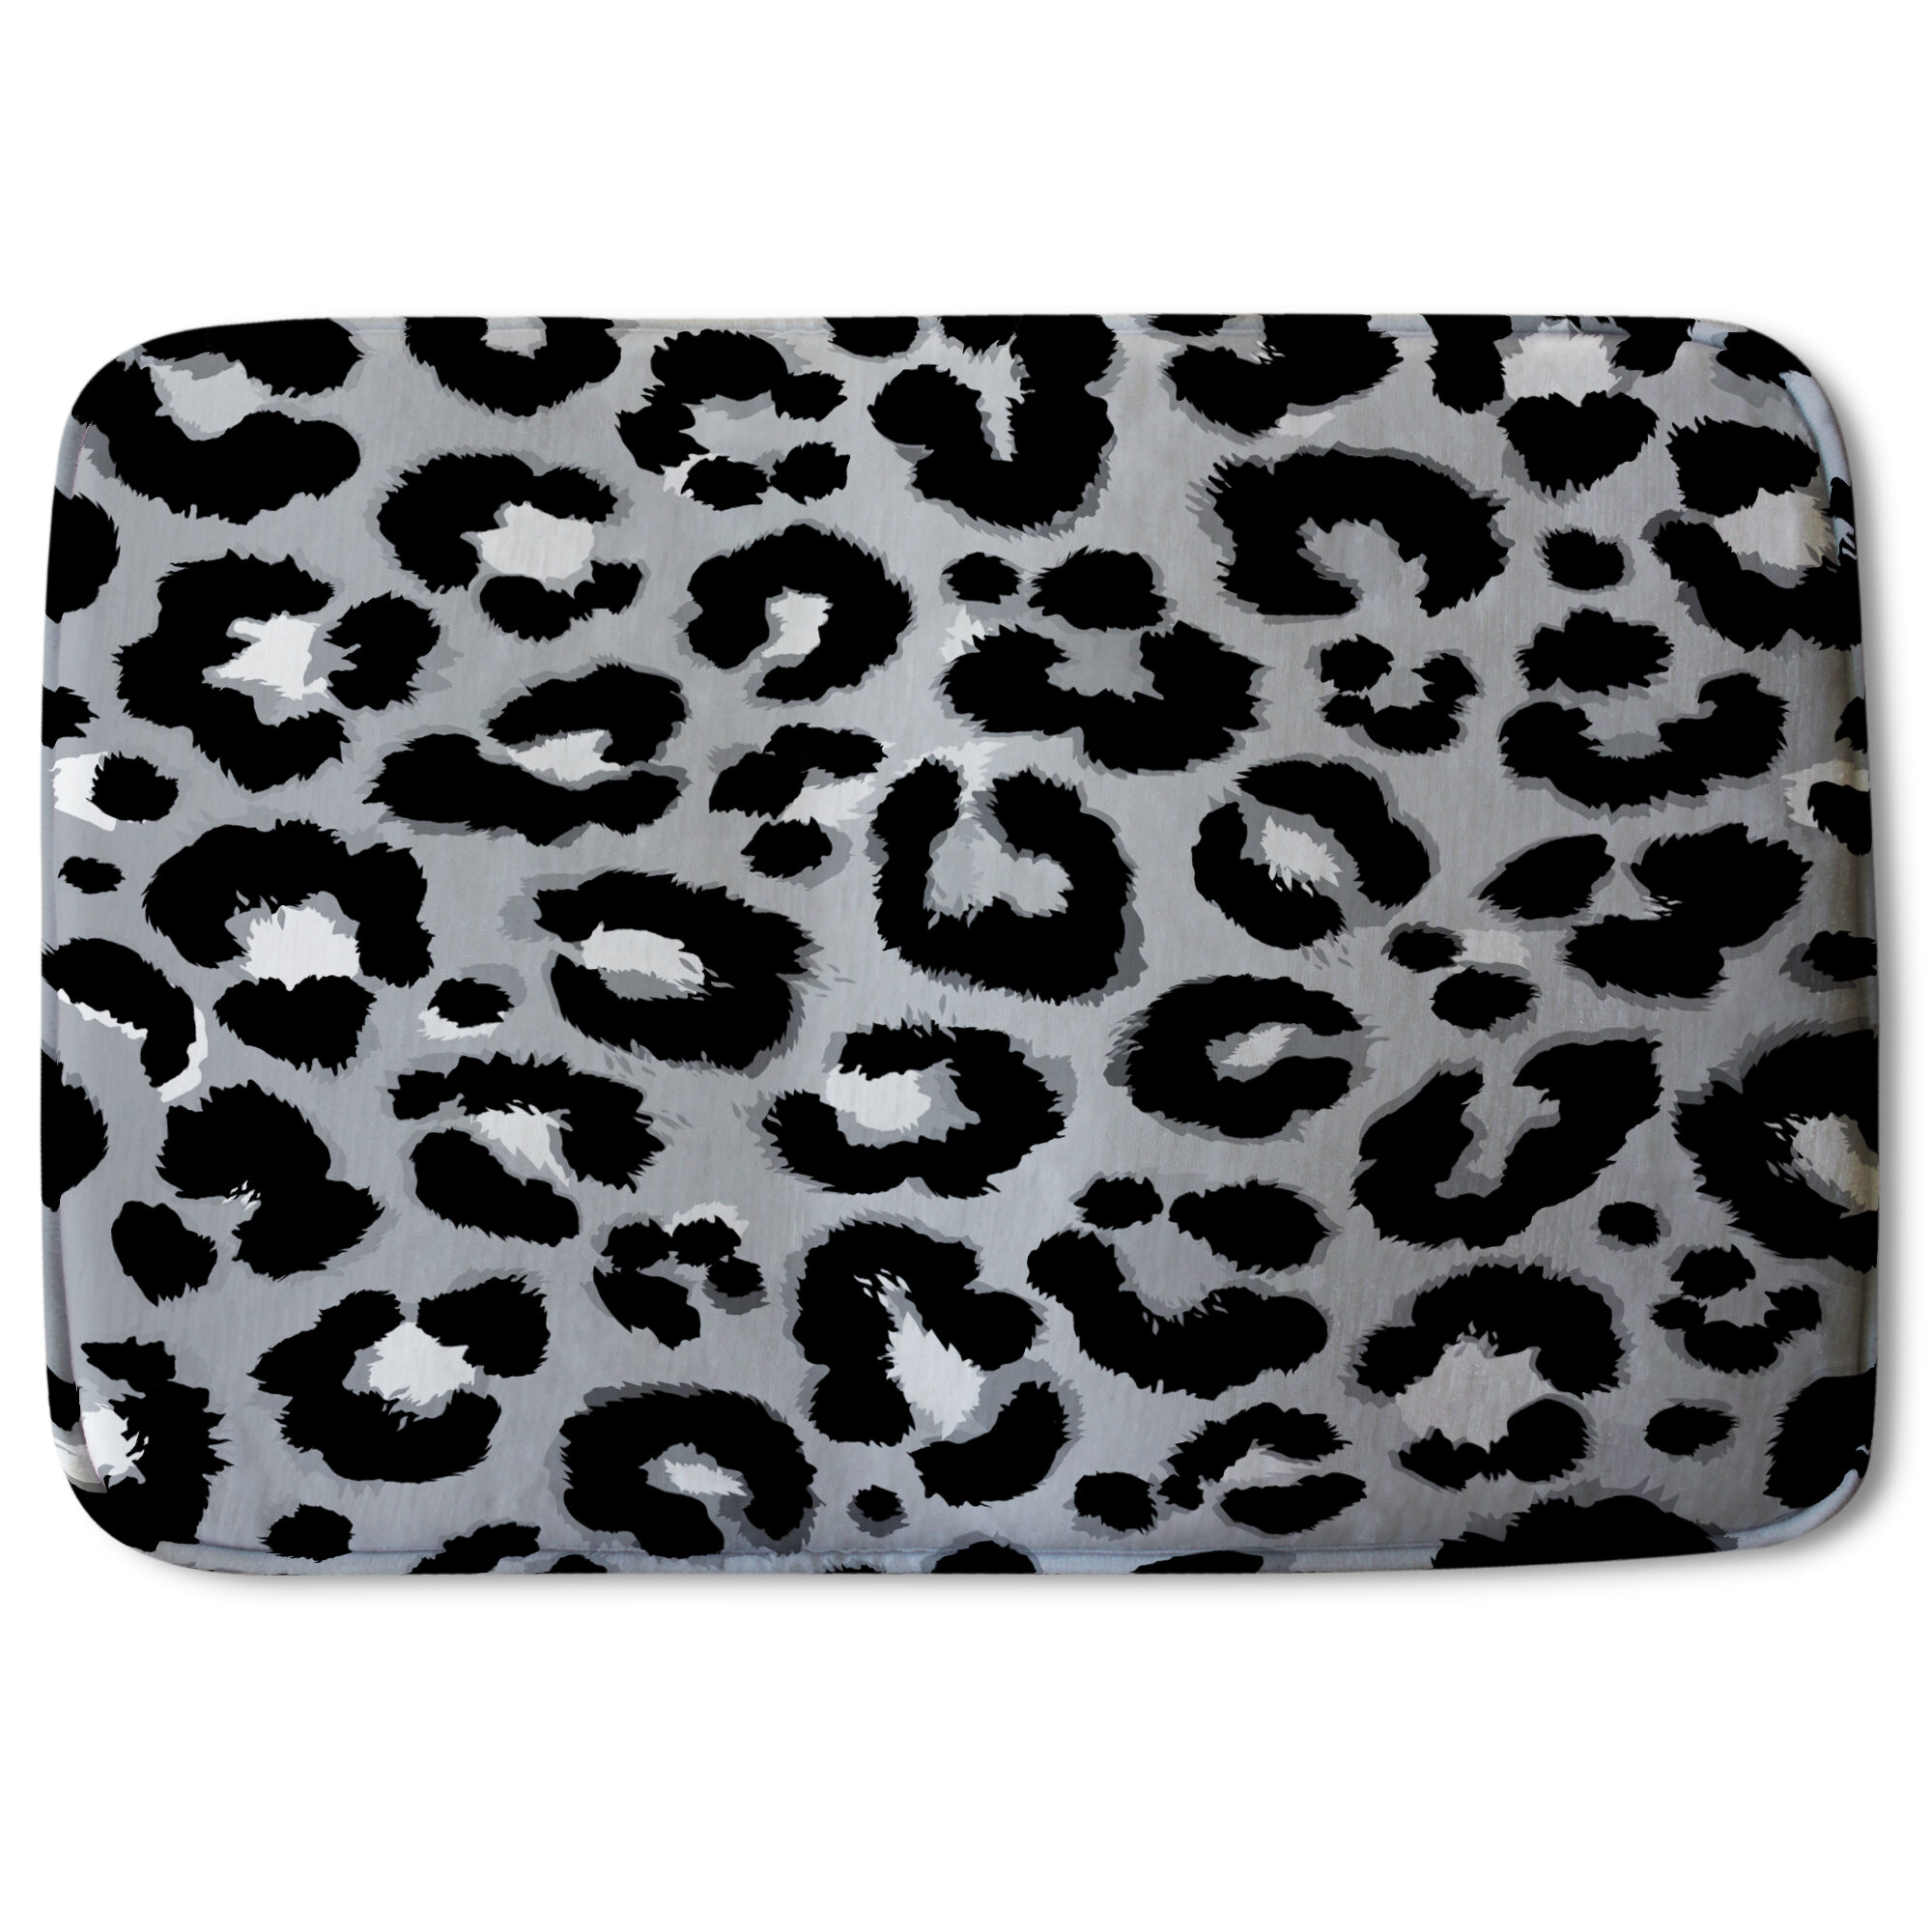 Everly Quinn Rubber Bath Mat with Non-Slip Backing